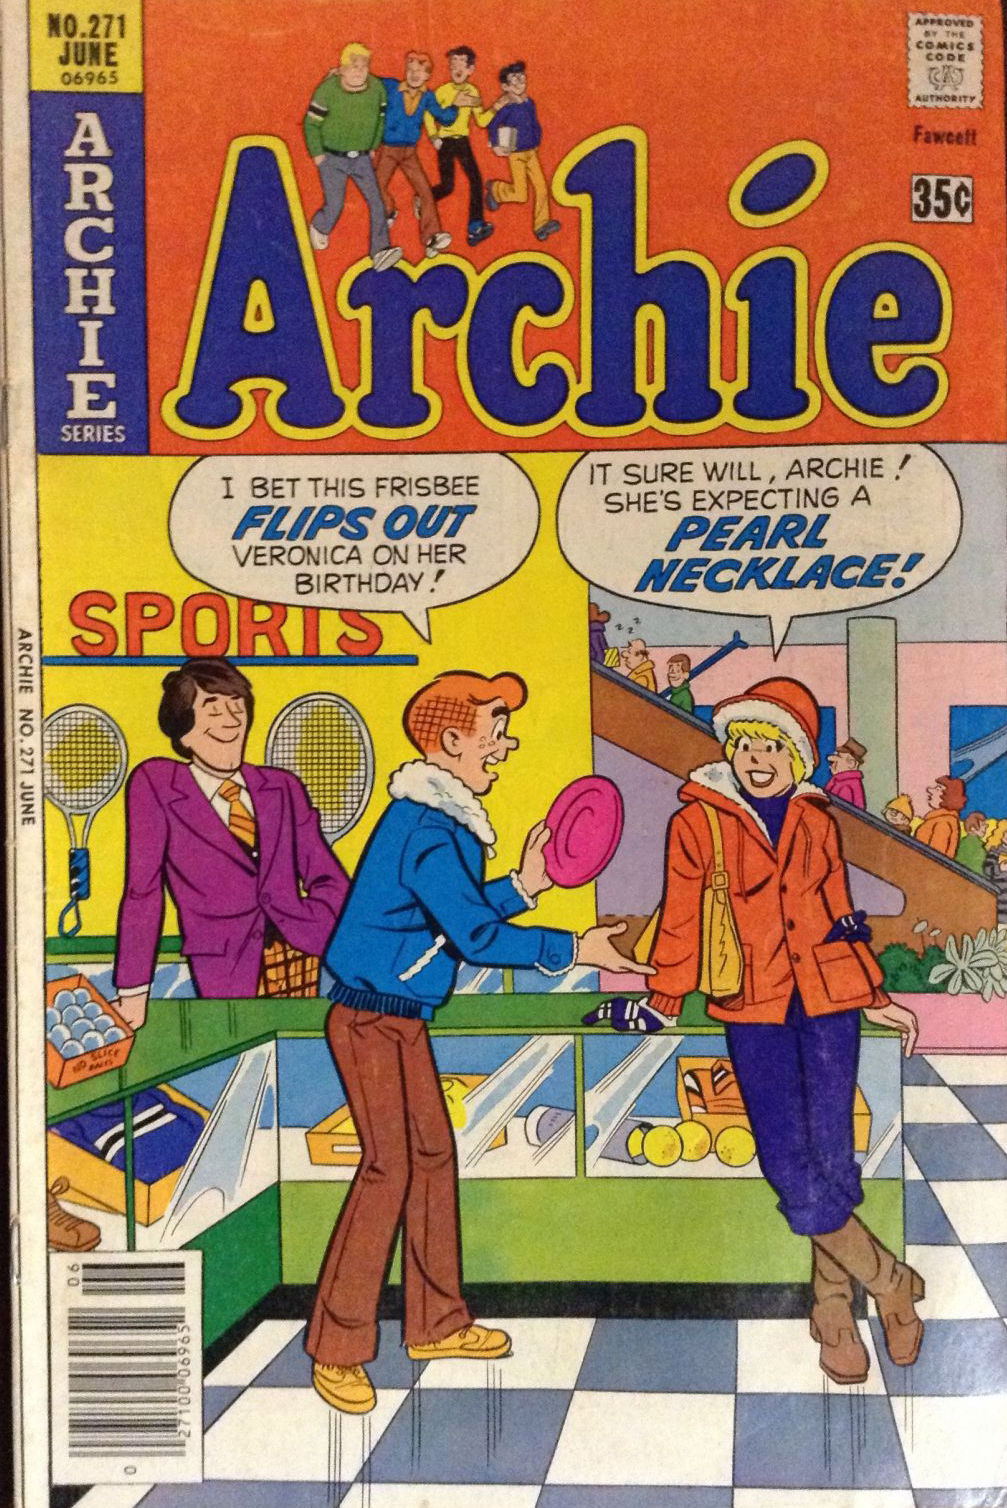 Pearl Necklace Archie